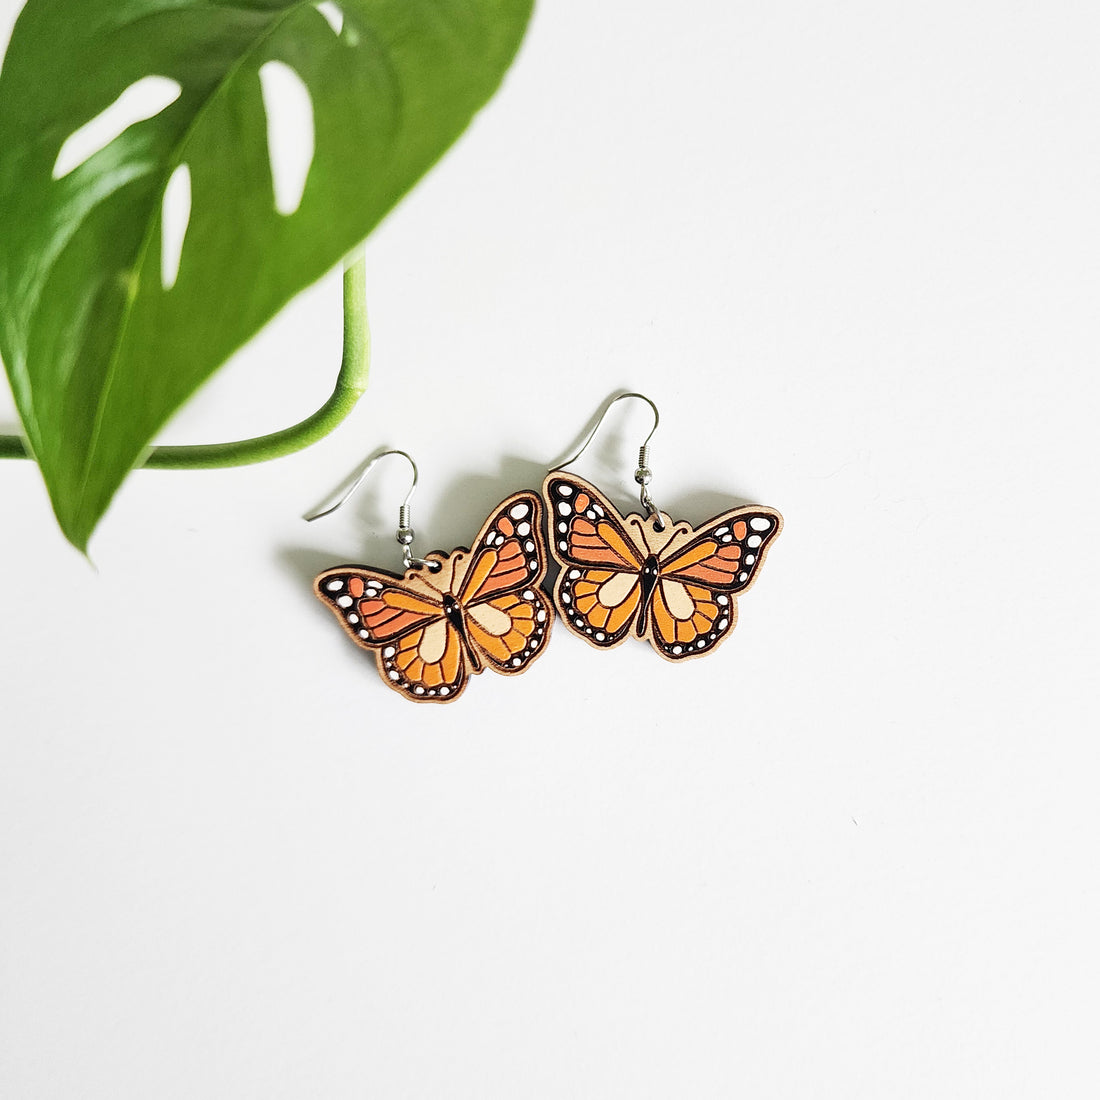 pair of monarch butterfly earrings on a white background next to a leaf